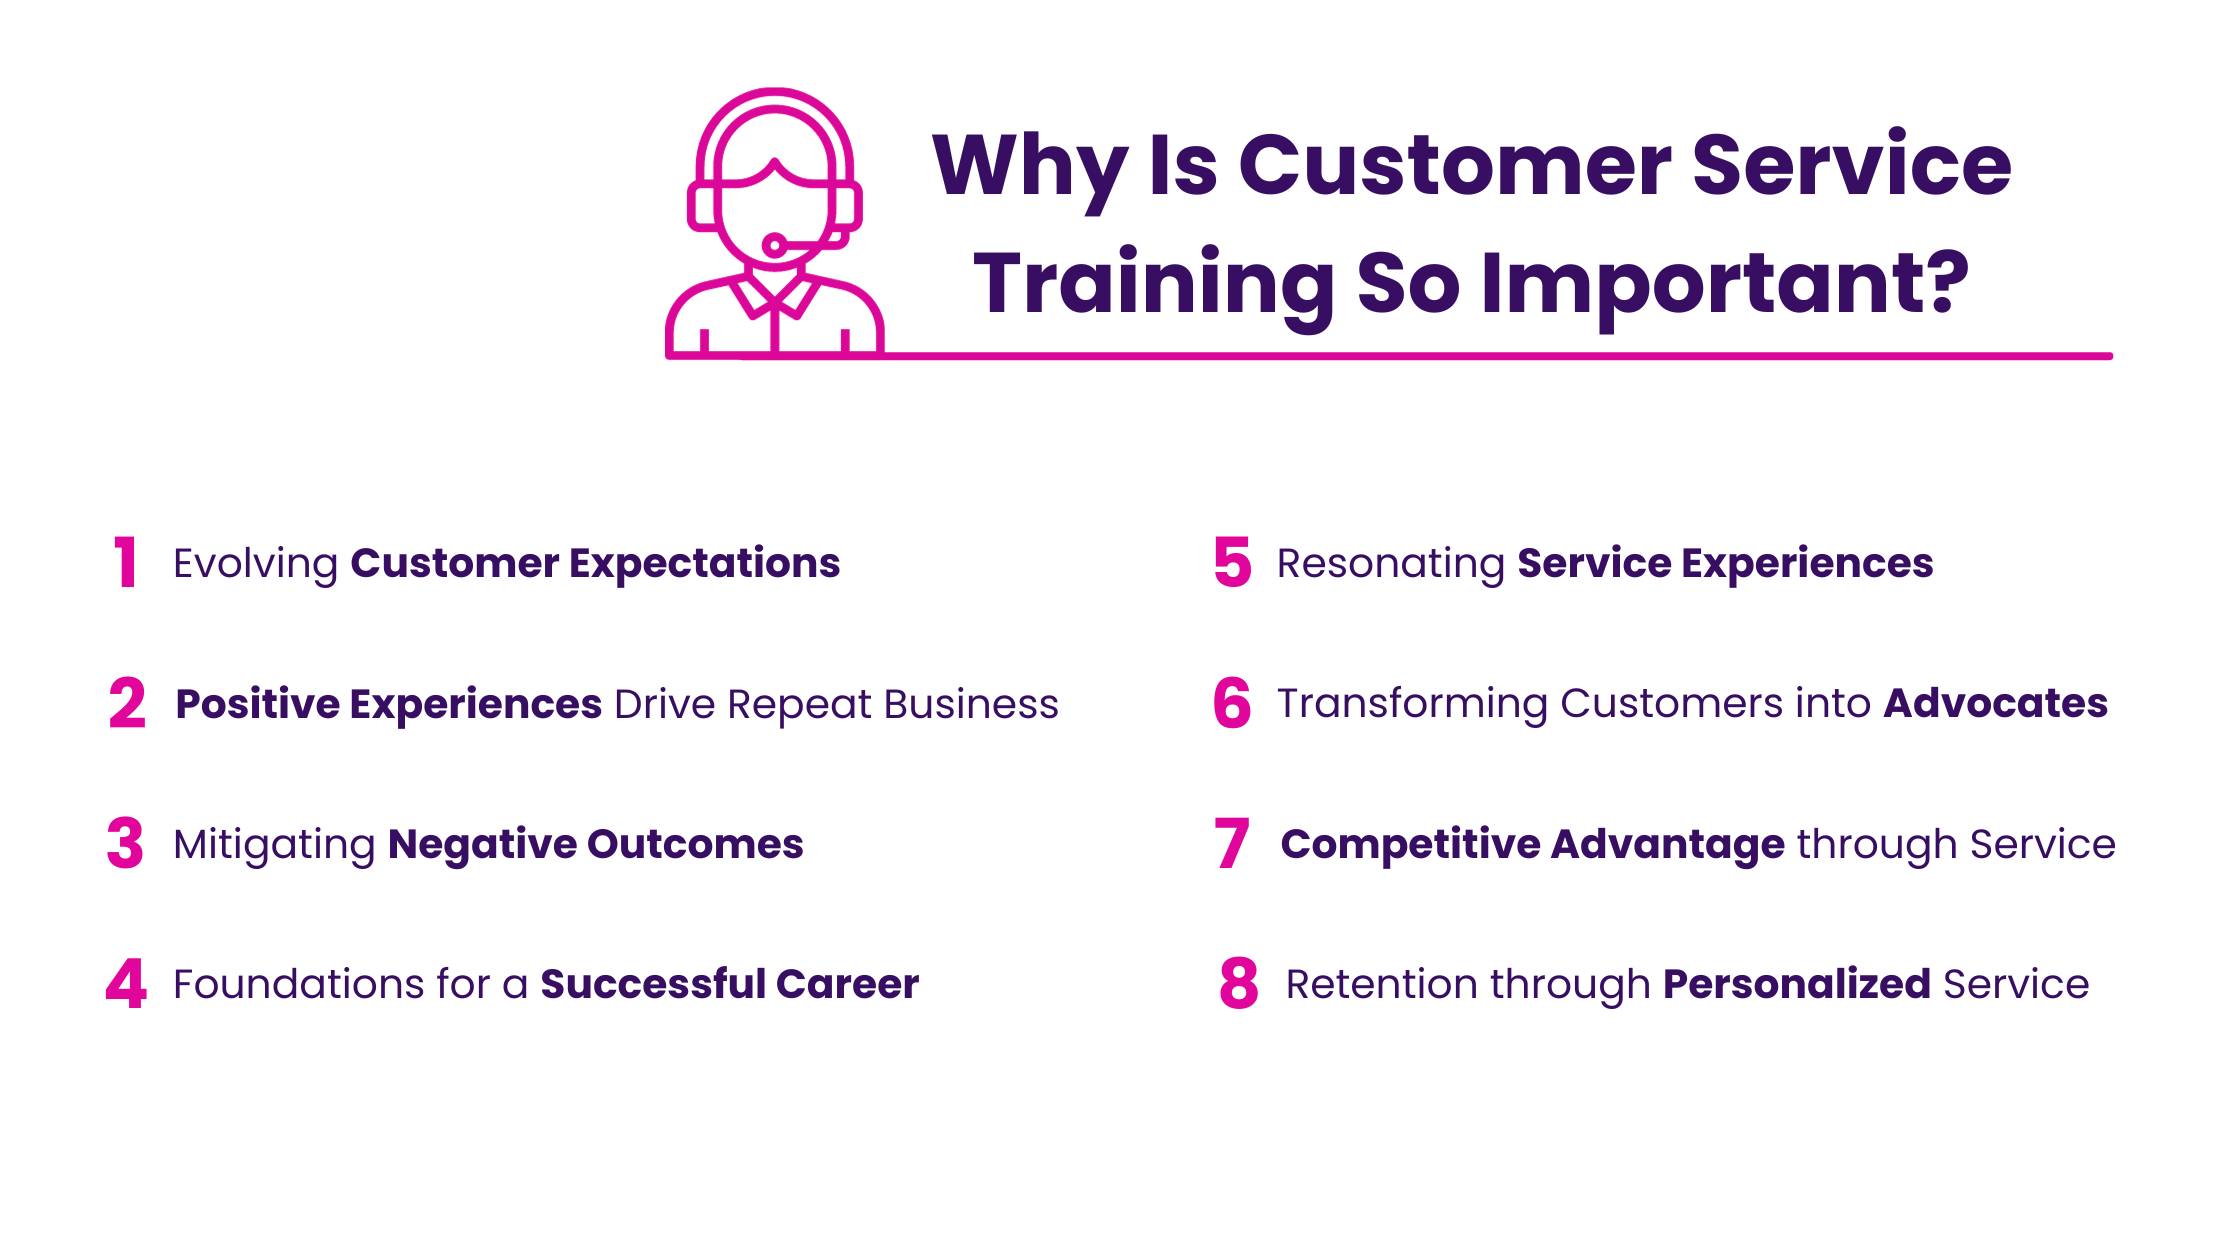 Why Is Customer Service Training So Important